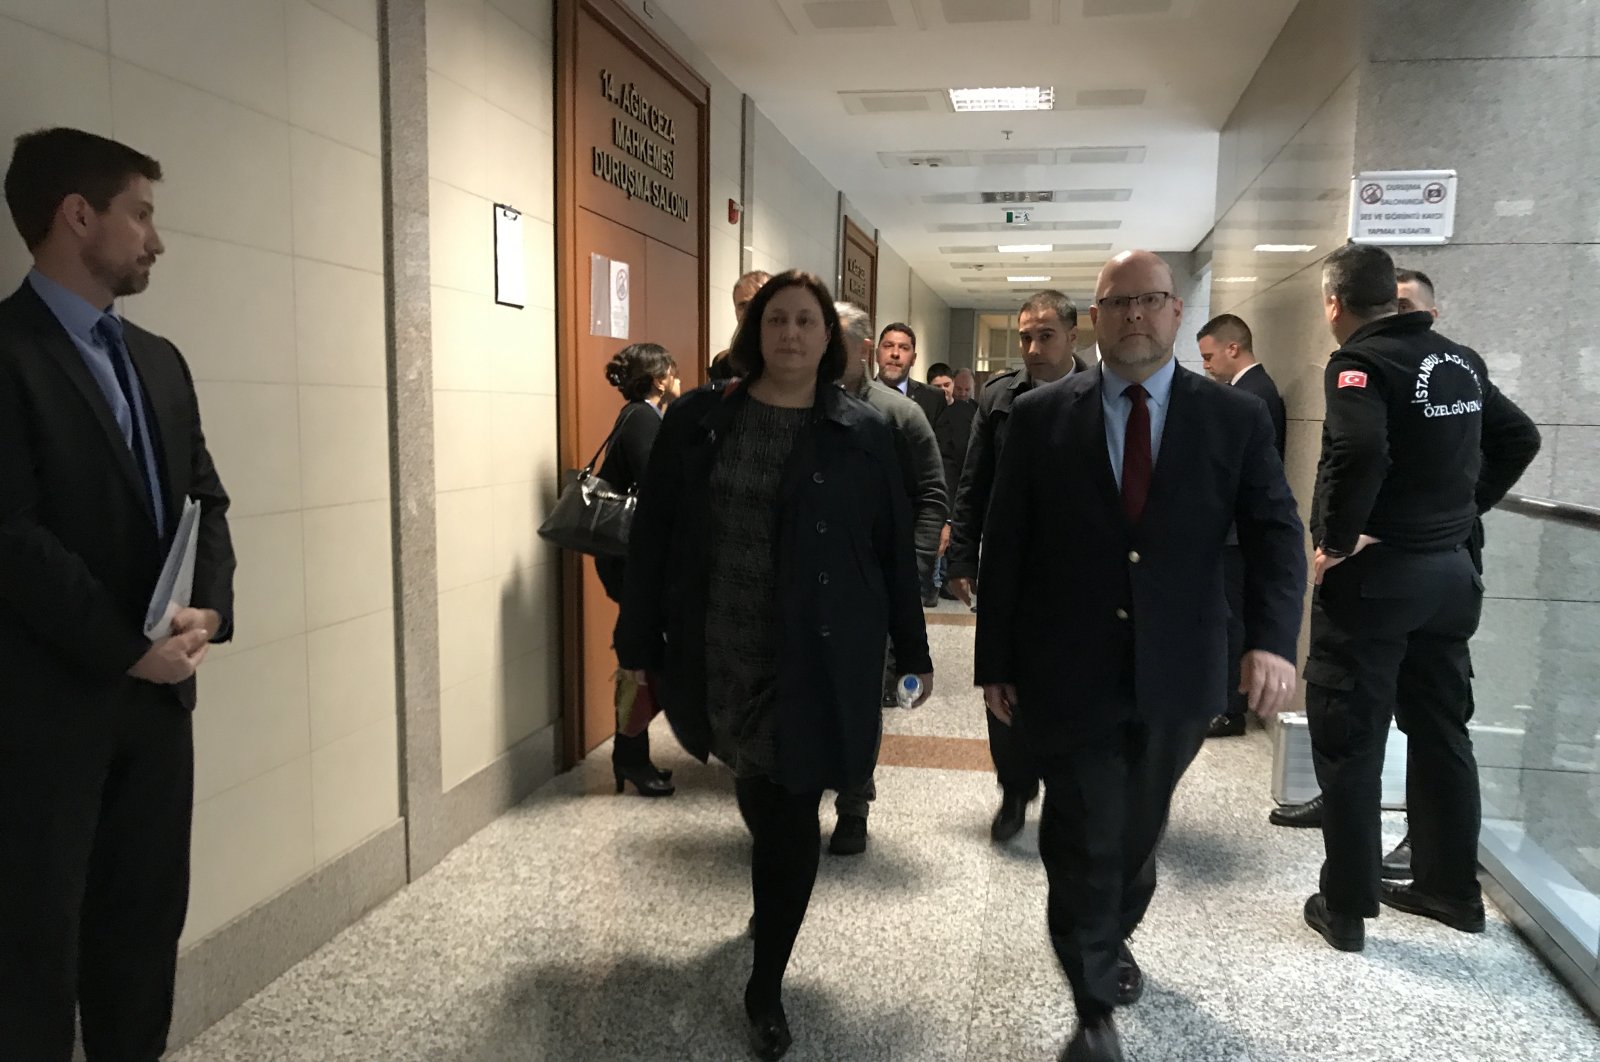 U.S. Consul General Daria Darnell (L) and Charge D'Affaires of the U.S. embassy in Ankara Jeffrey Hovenier watch the hearing, Istanbul, March 10, 2020. (Photo by Fatih Ulaş)